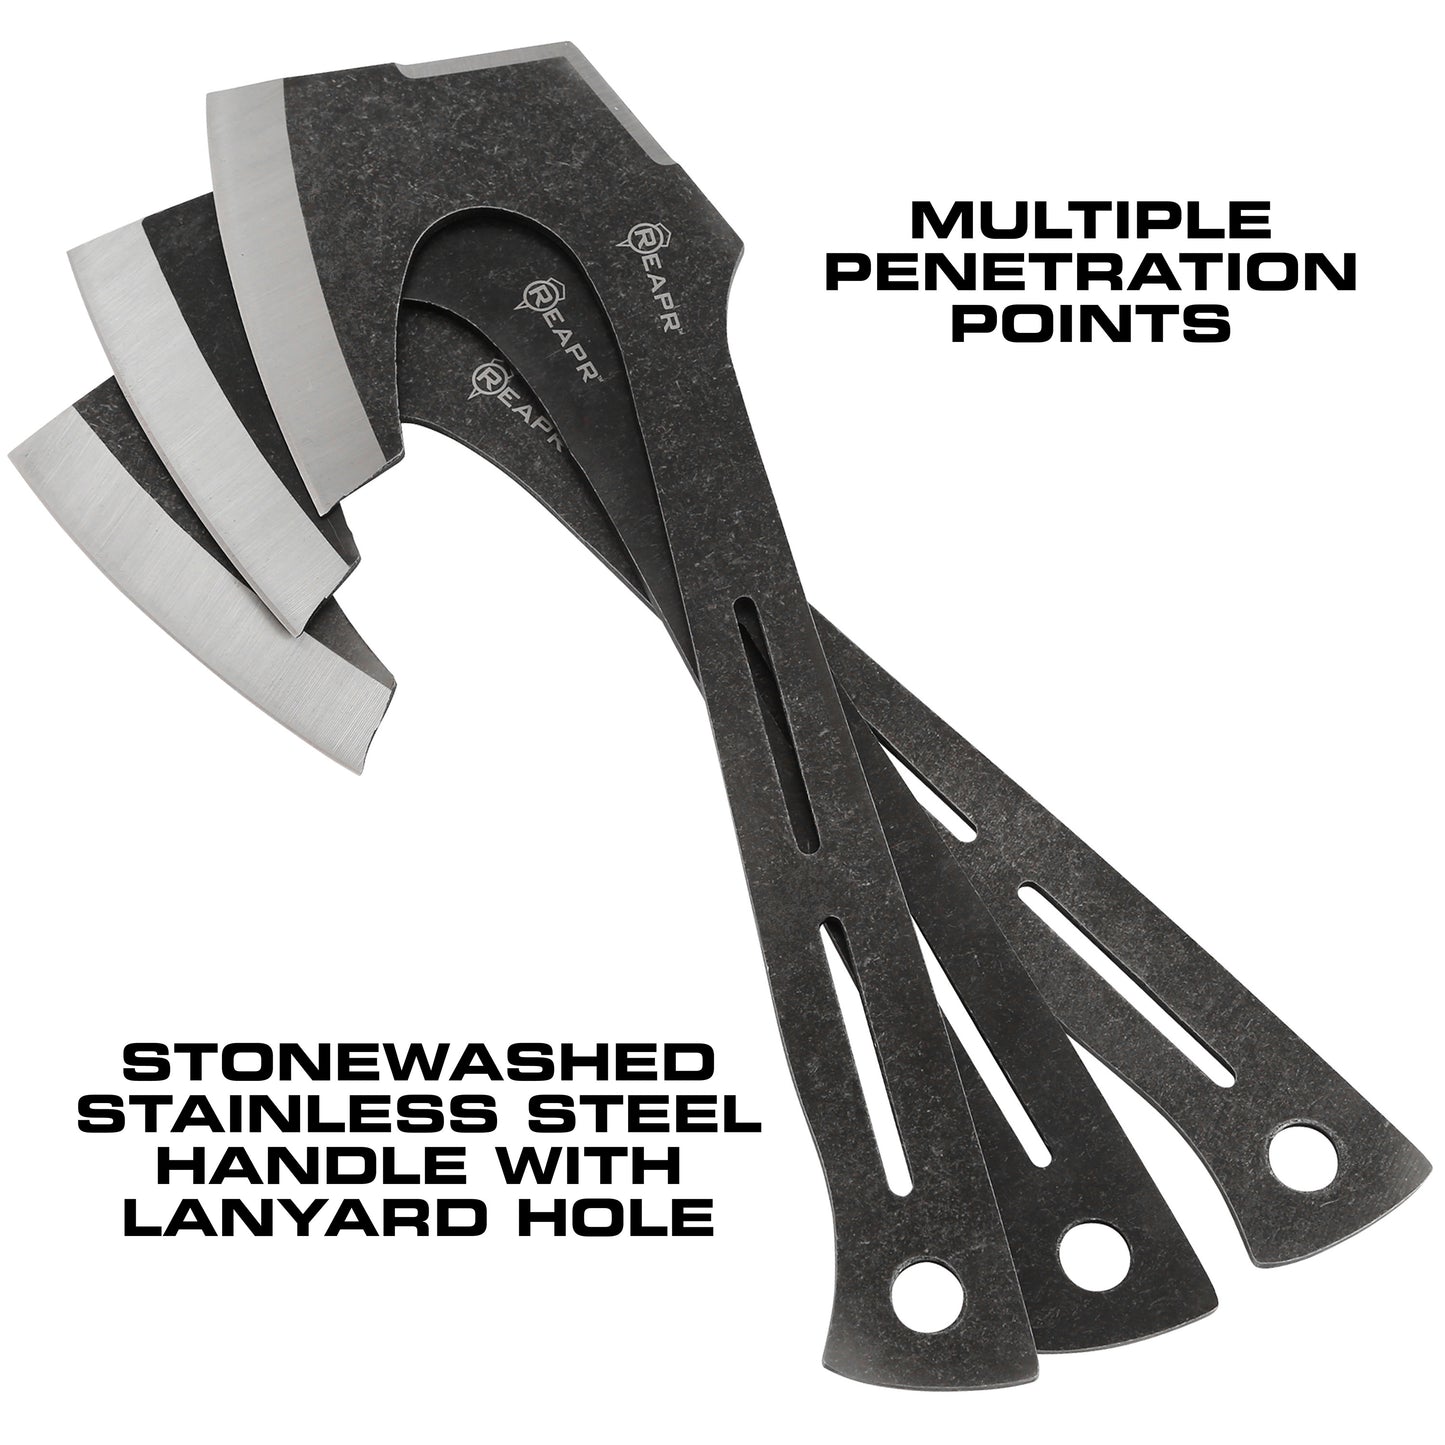 REAPR 11023 Chuk 3 Piece Throwing Axe Setthrowing axe set is constructed of single-piece 420 stainless steel for withstanding the force of throws.